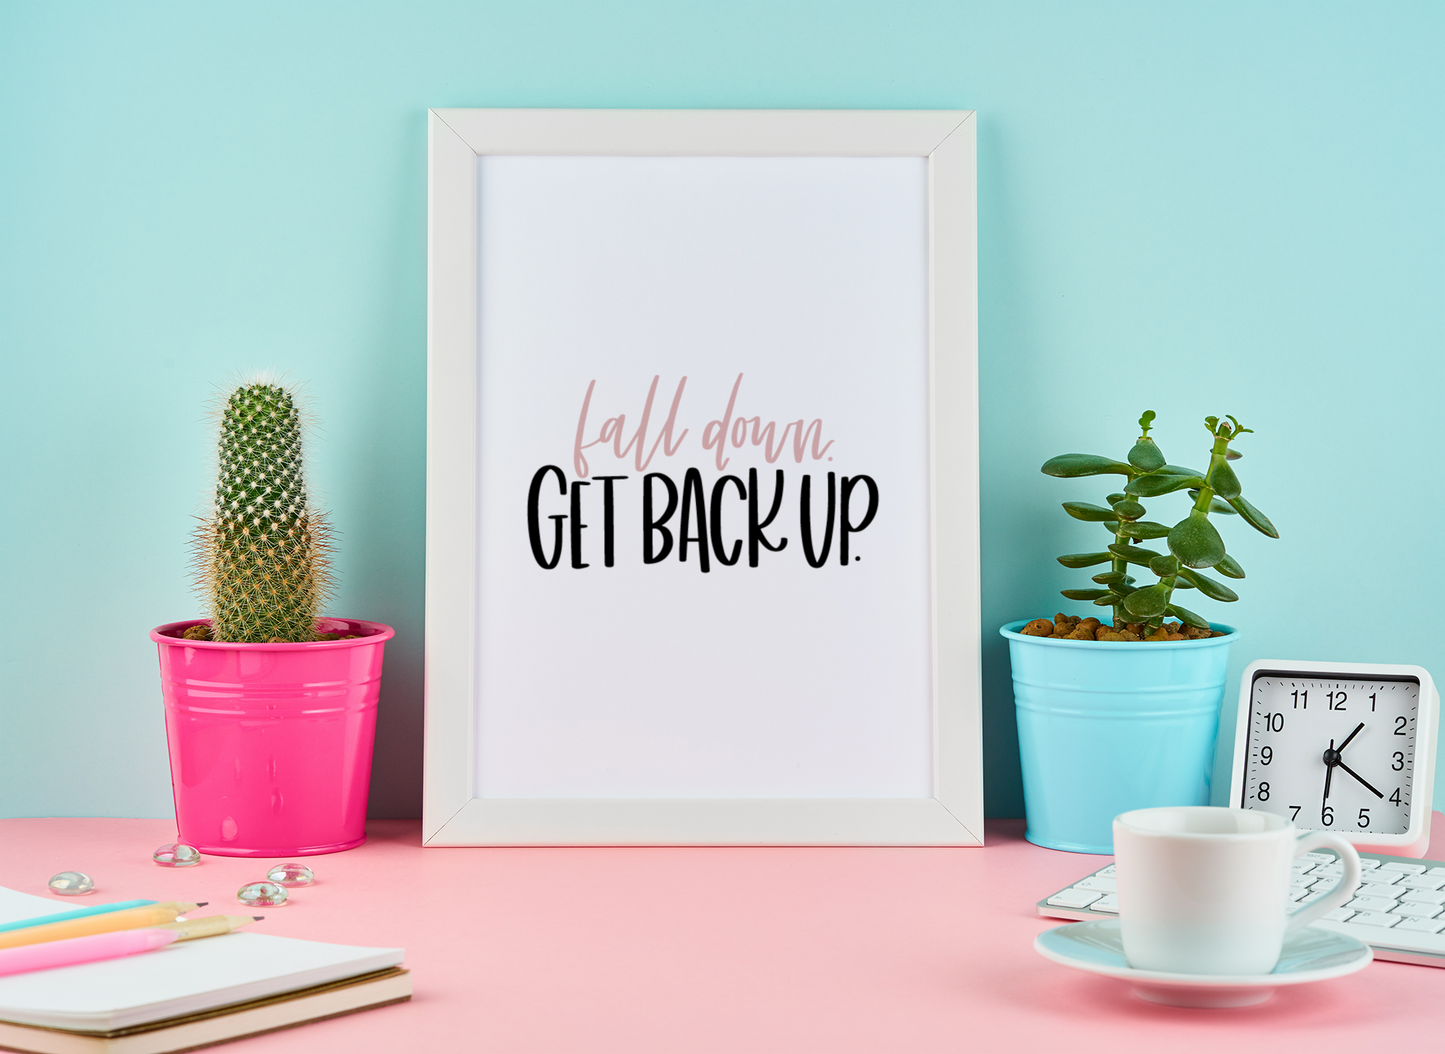 Fall Down Get Back Up Motivational Inspiration Wall Decor Quote Print